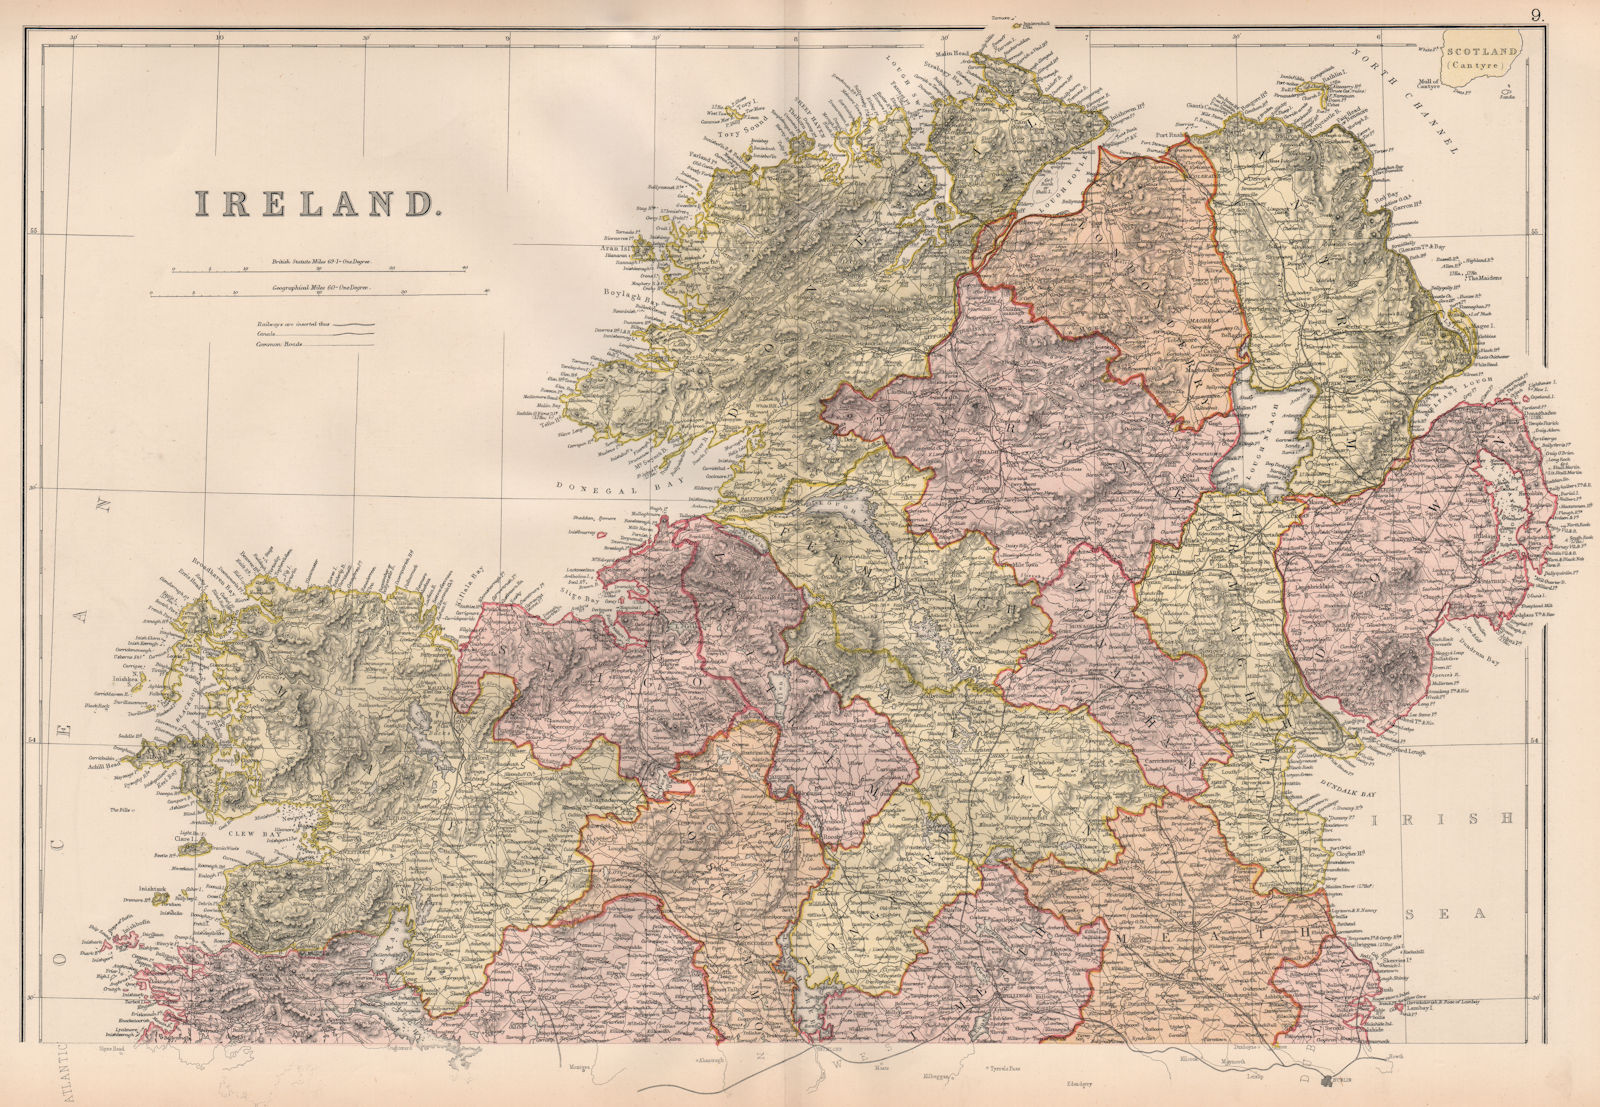 Associate Product IRELAND NORTH. Ulster. Counties & railways. BLACKIE 1882 old antique map chart